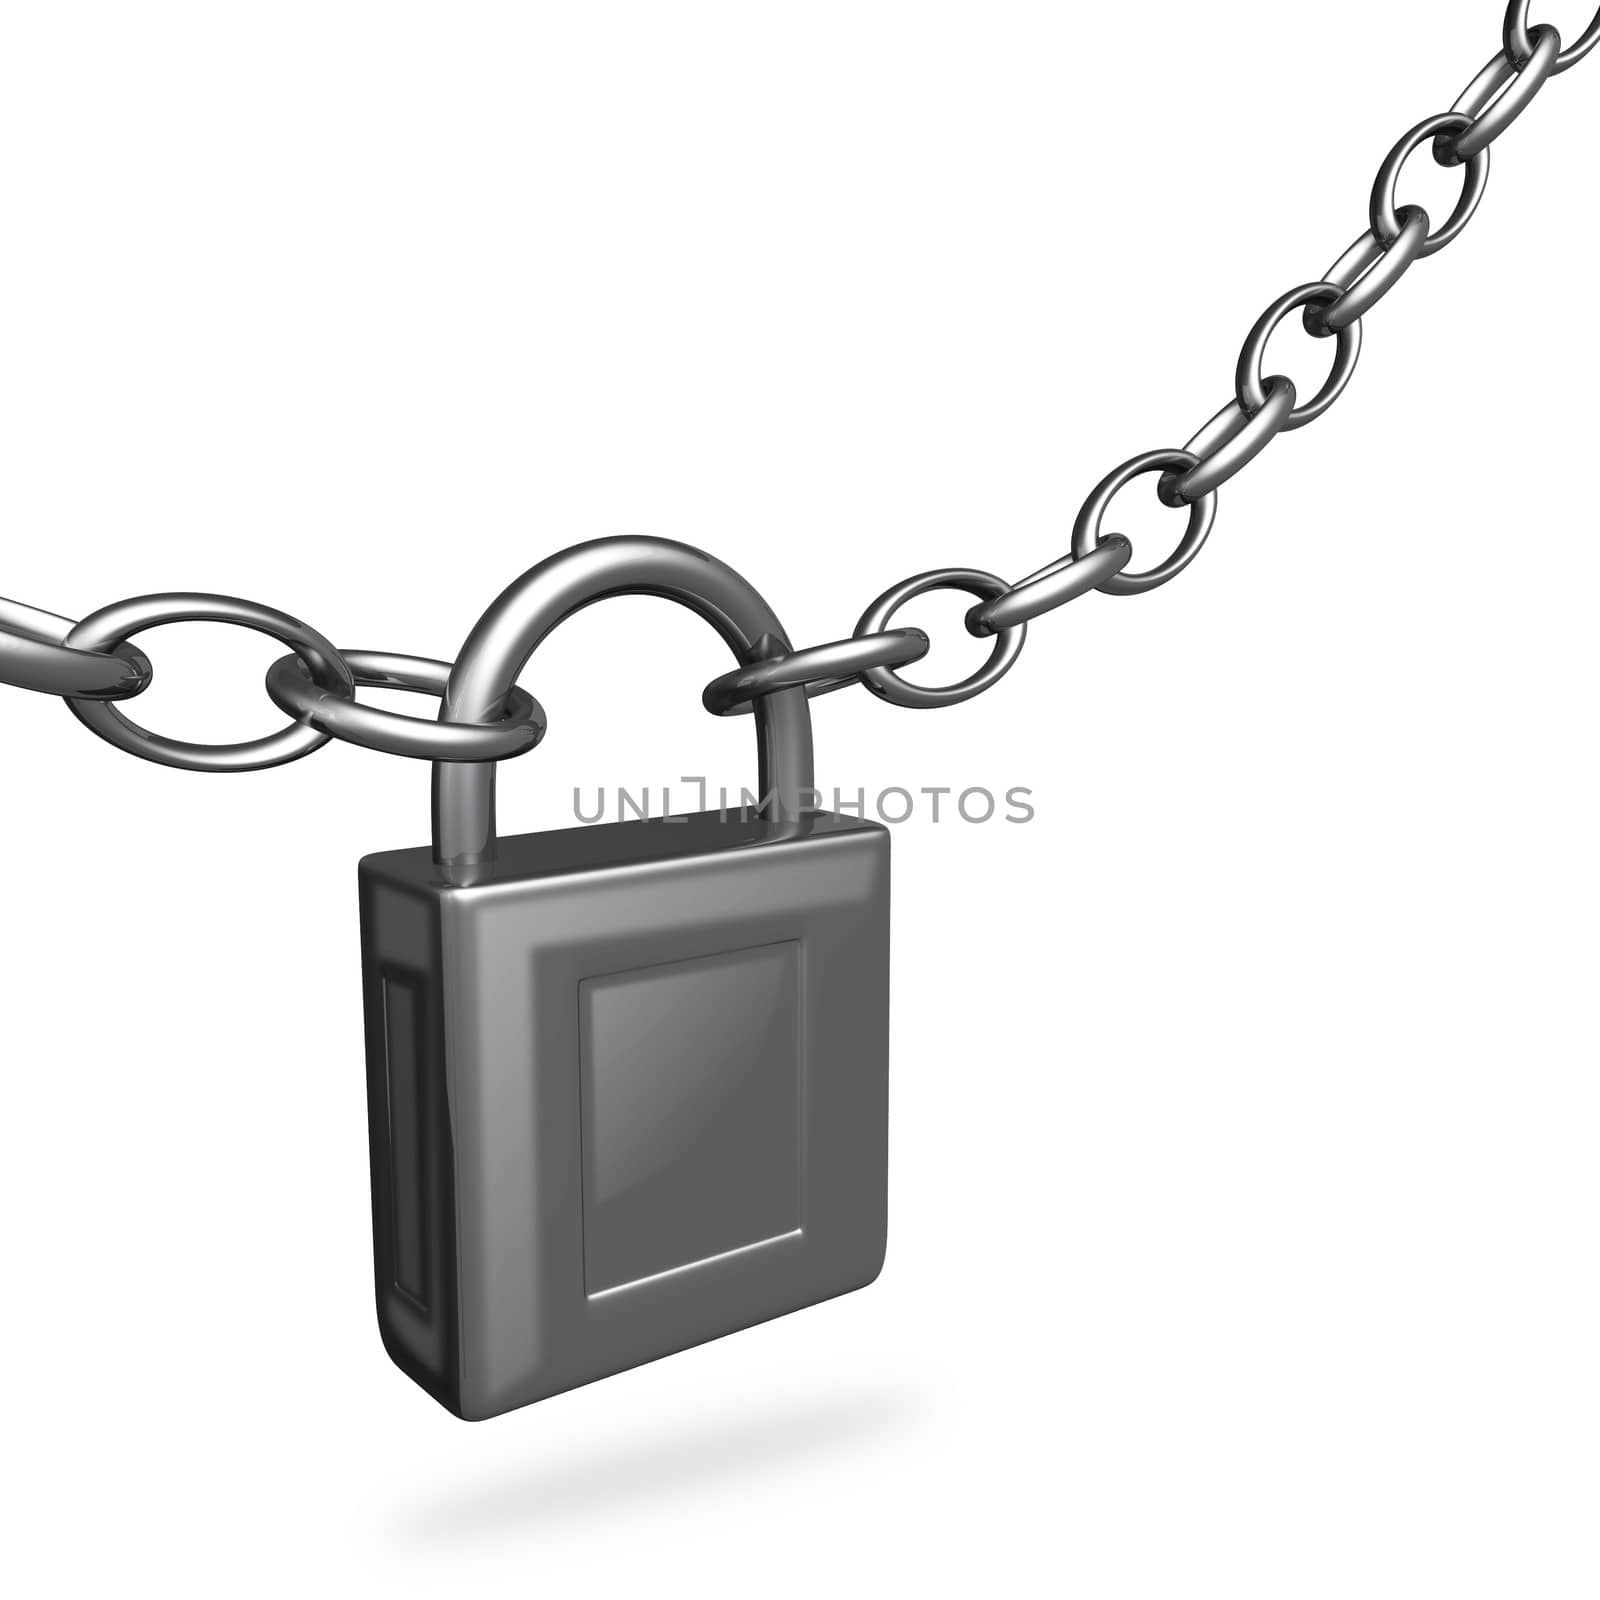 Security concept illustrated with a steel lock and chain
